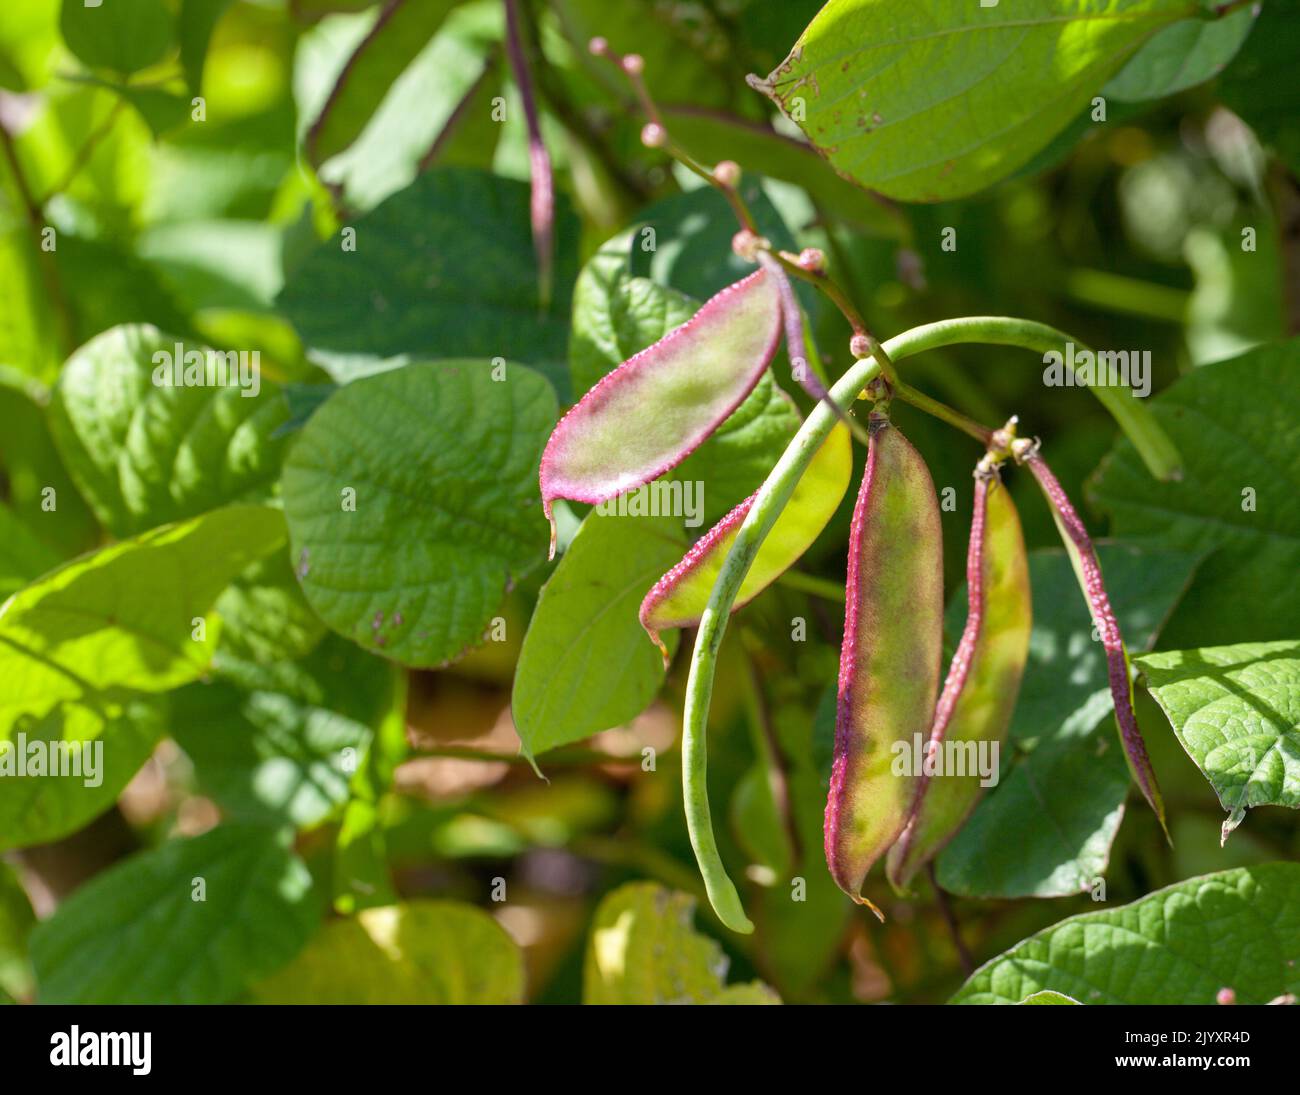 Ripening Harvest - Close-up of Fresh LabLab Beans 'Yings' (Lablab purpureus)  vegetable plants growing in a British Garden Stock Photo